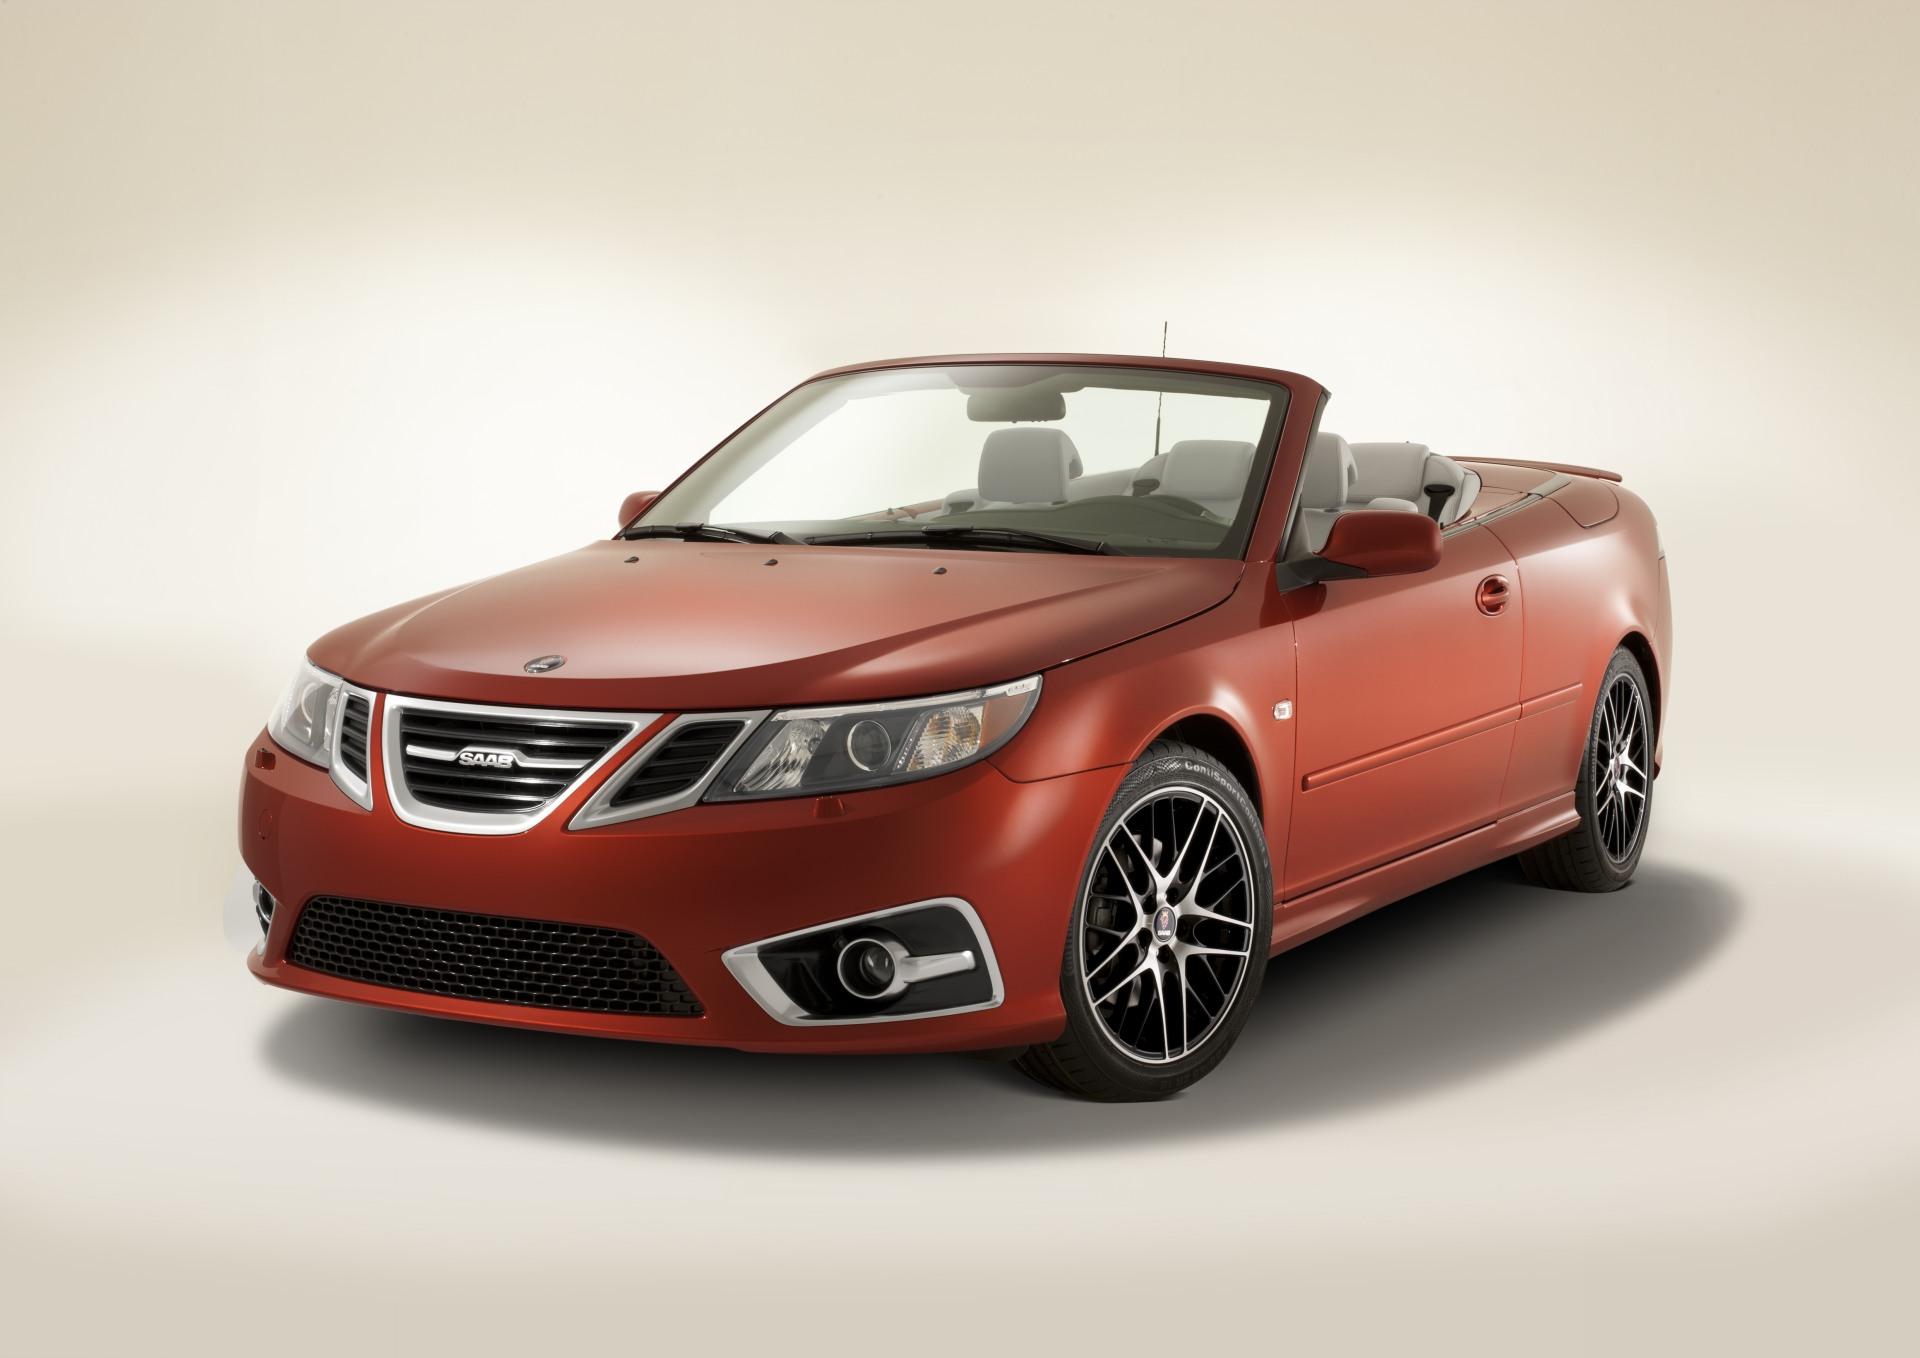 2011 Saab 9-3 Convertible Independence Edition